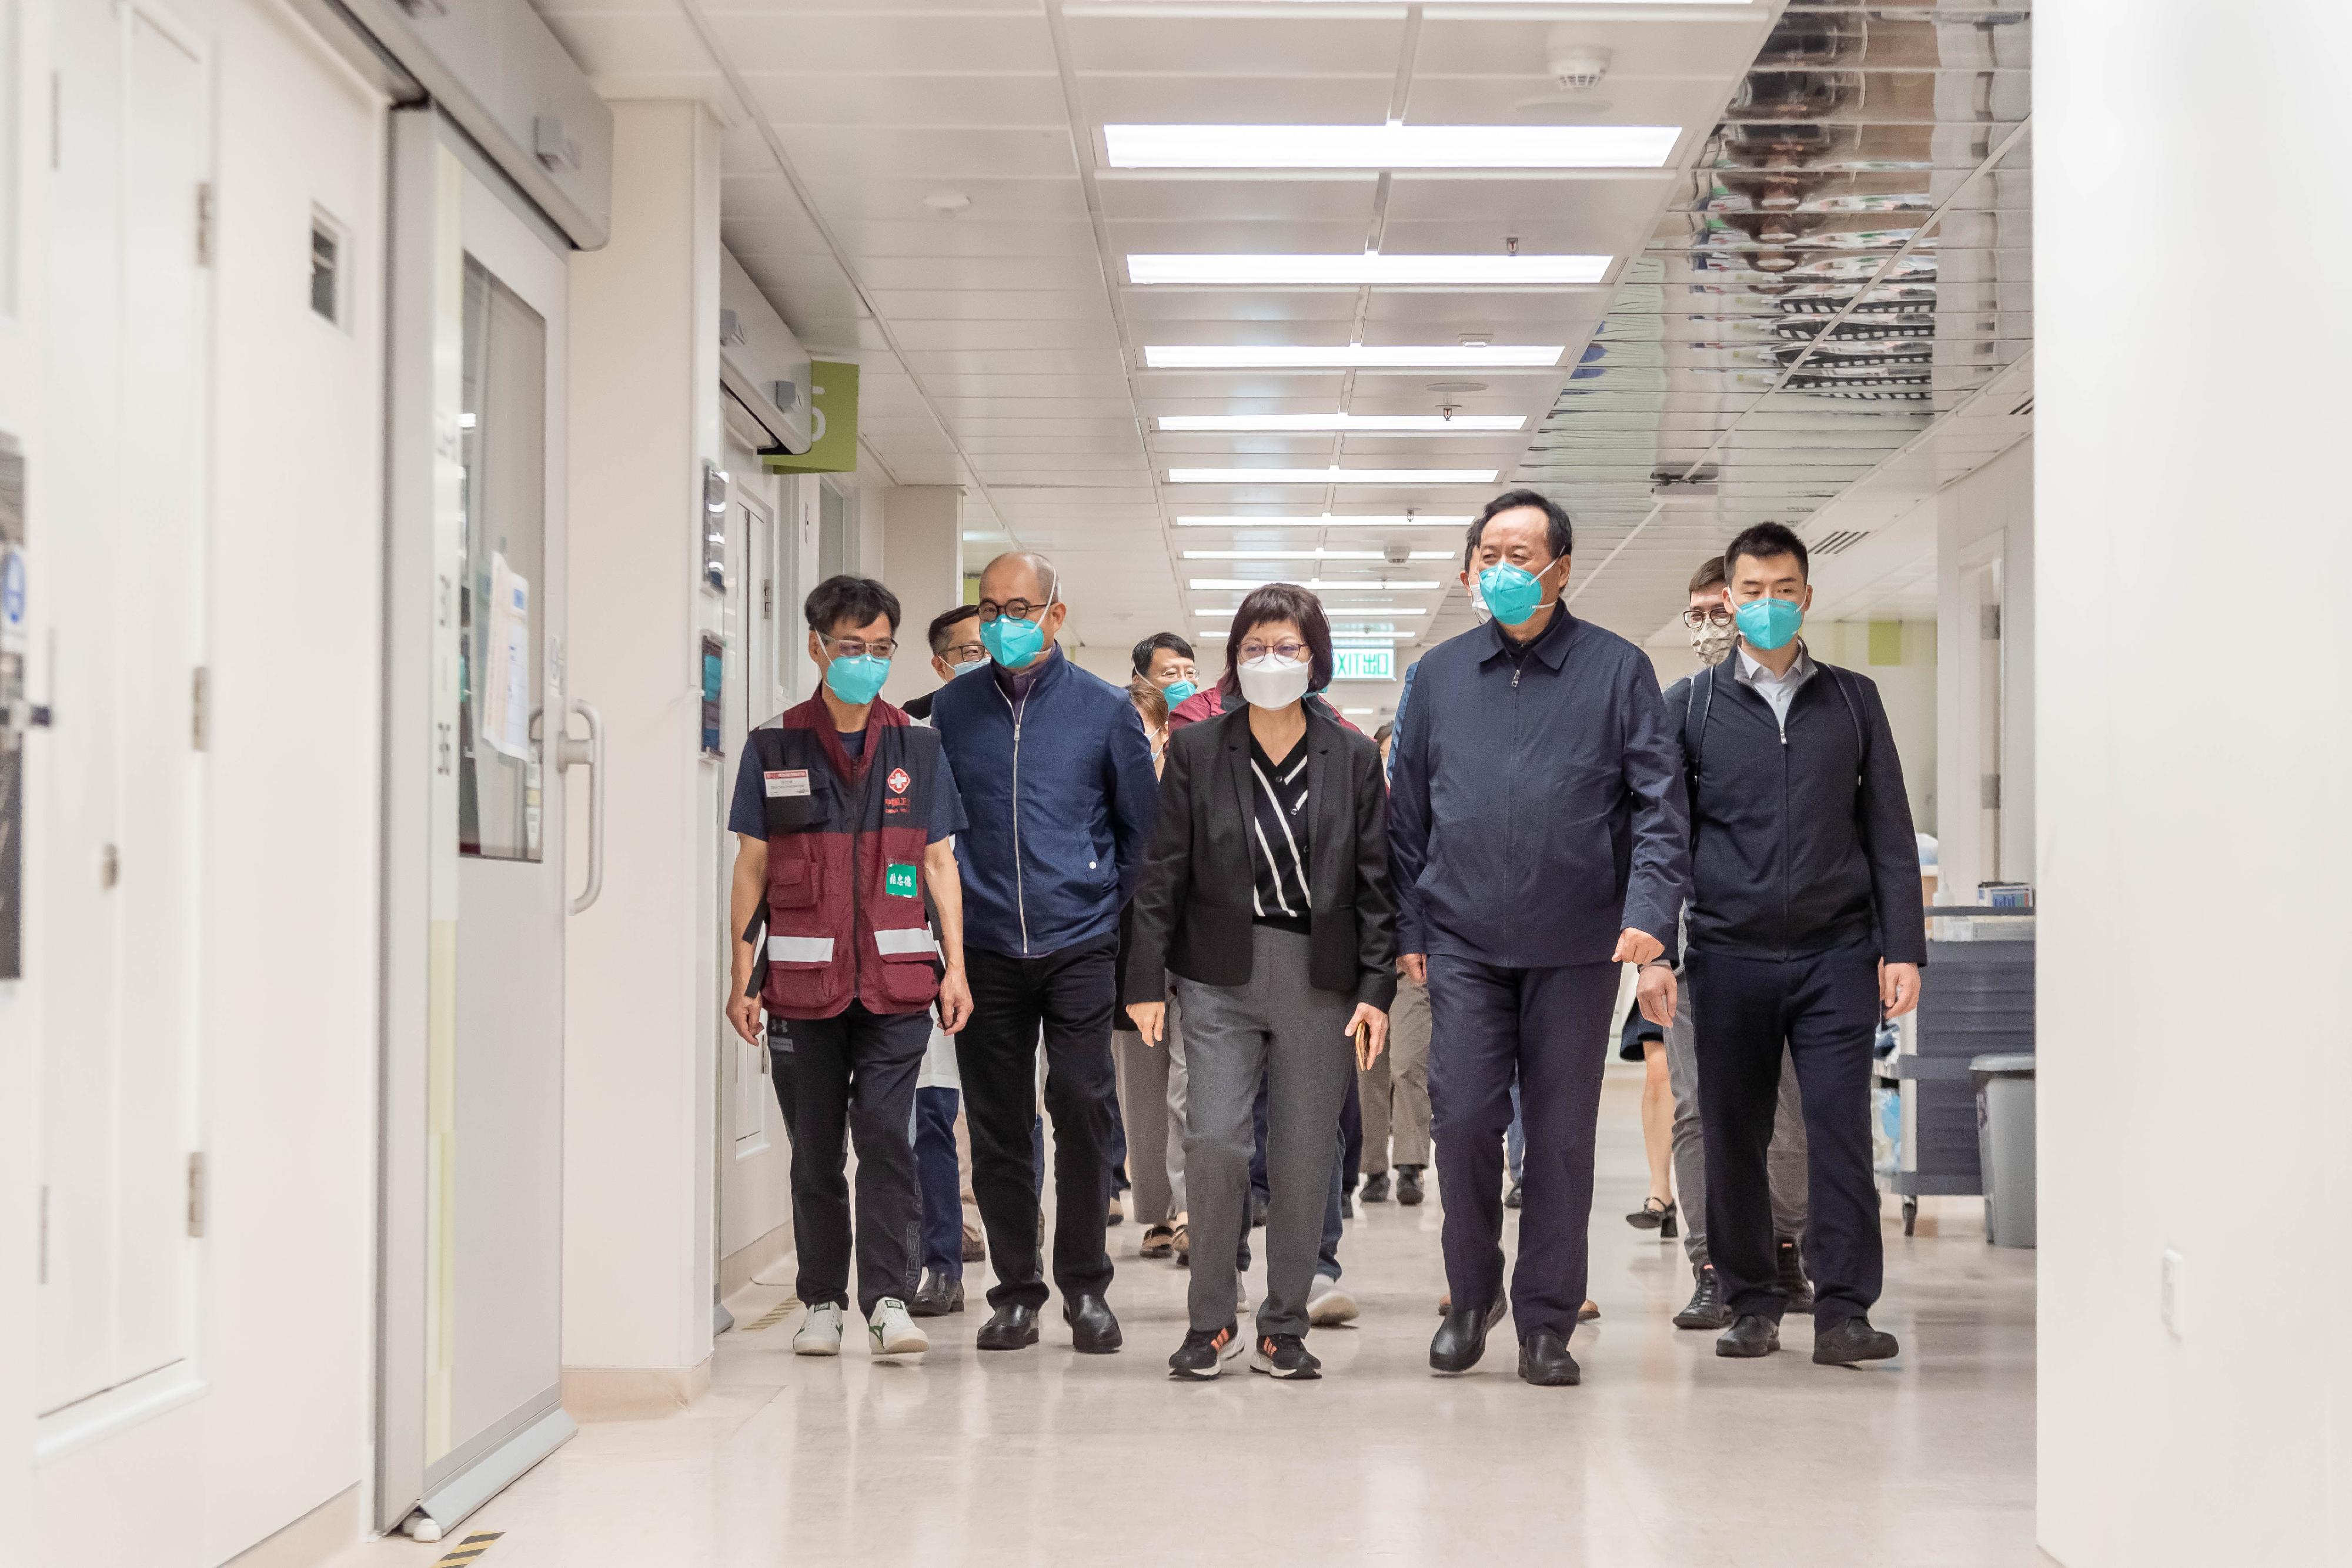 The Mainland Chinese medicine expert group of the Central Authorities today (April 1) visited the North Lantau Hospital Hong Kong Infection Control Centre to understand the treatment arrangements for COVID-19 patients.